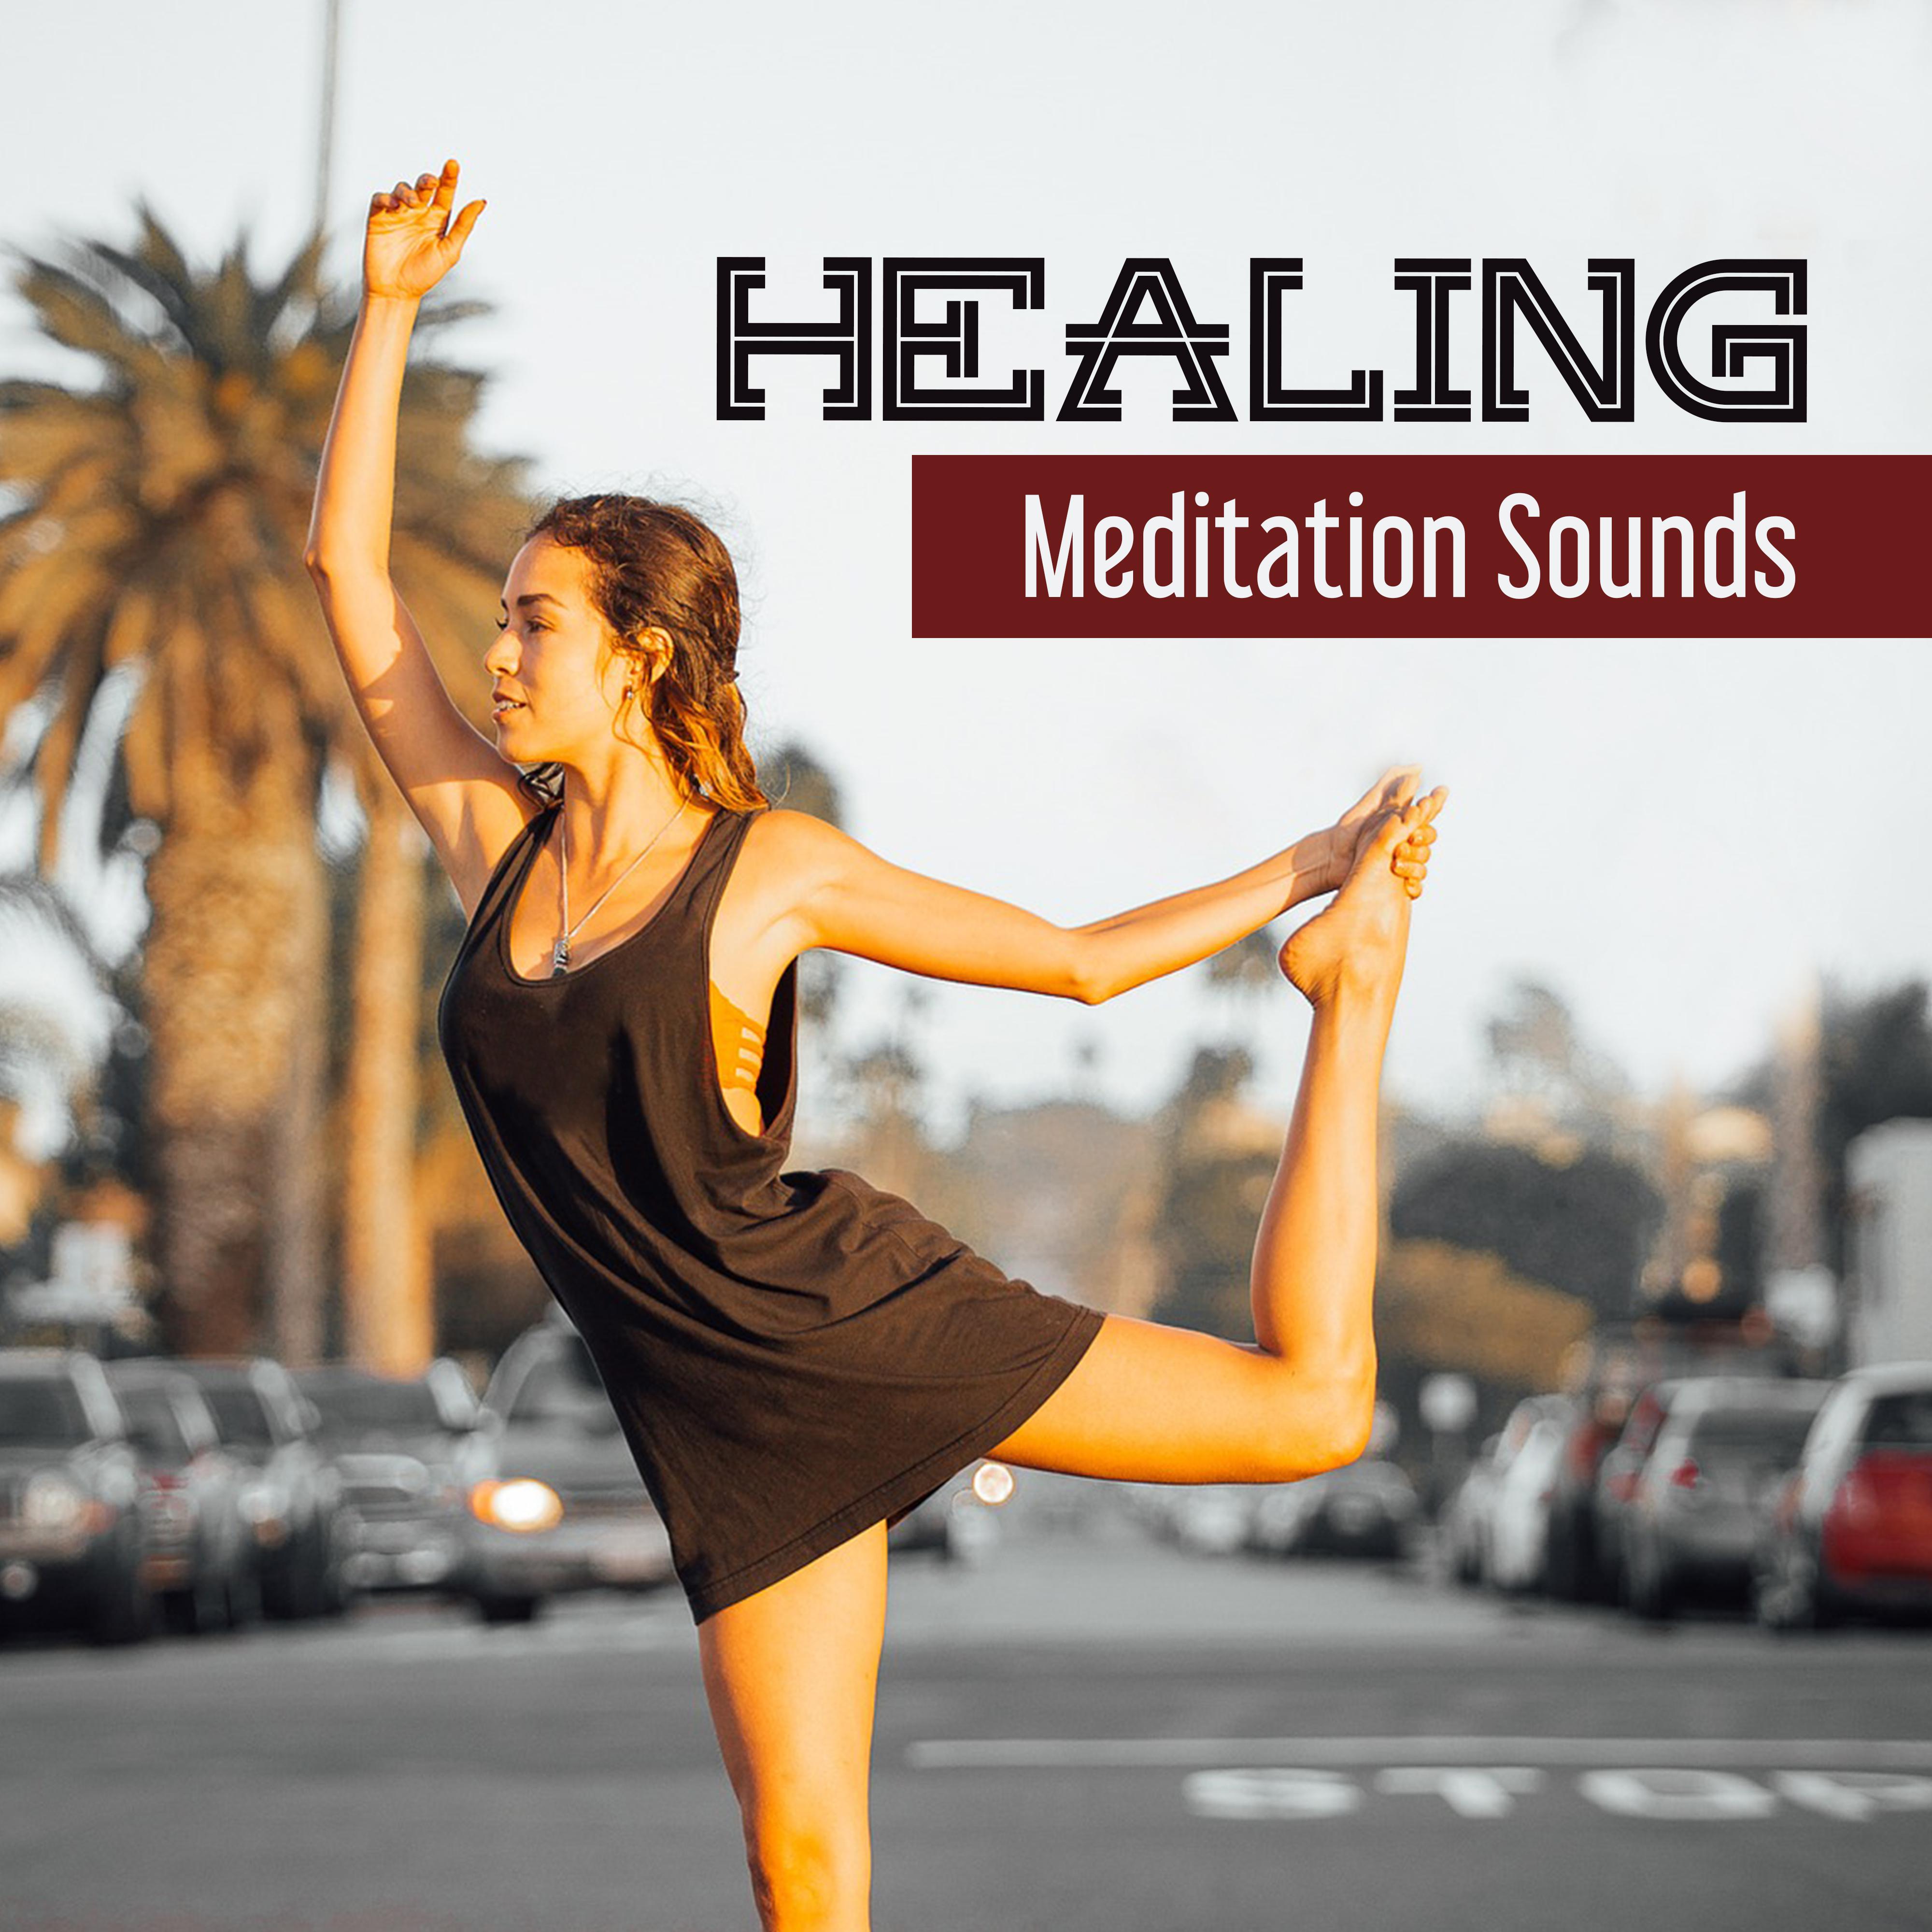 Healing Meditation Sounds  Calming Waves to Relax, Stress Relief, Music to Meditate